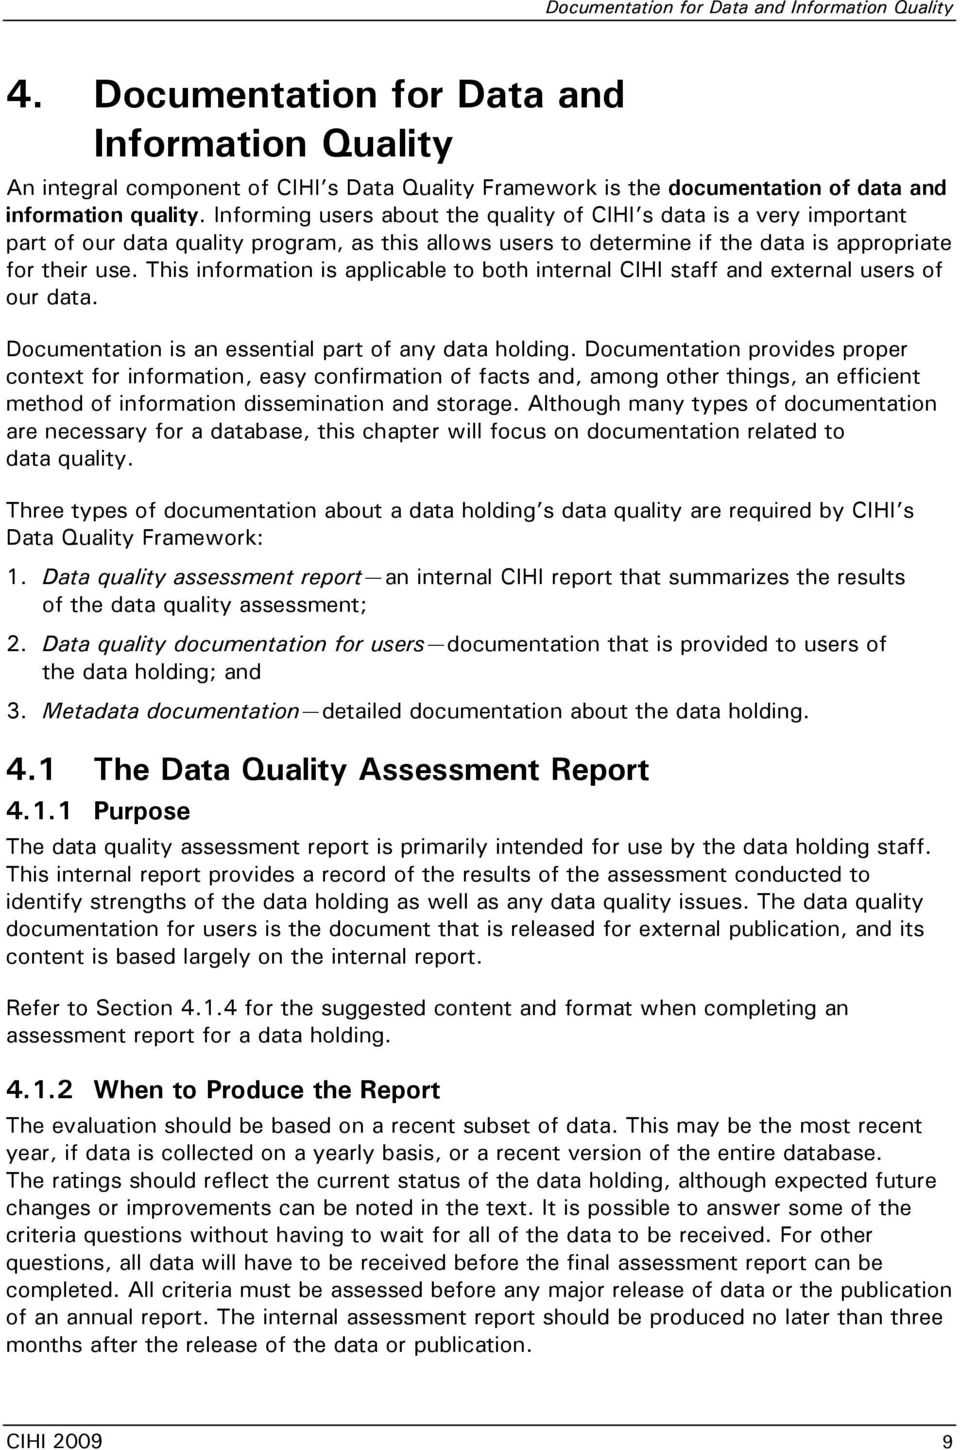 The Cihi Data Quality Framework – Pdf Free Download Pertaining To Data Quality Assessment Report Template